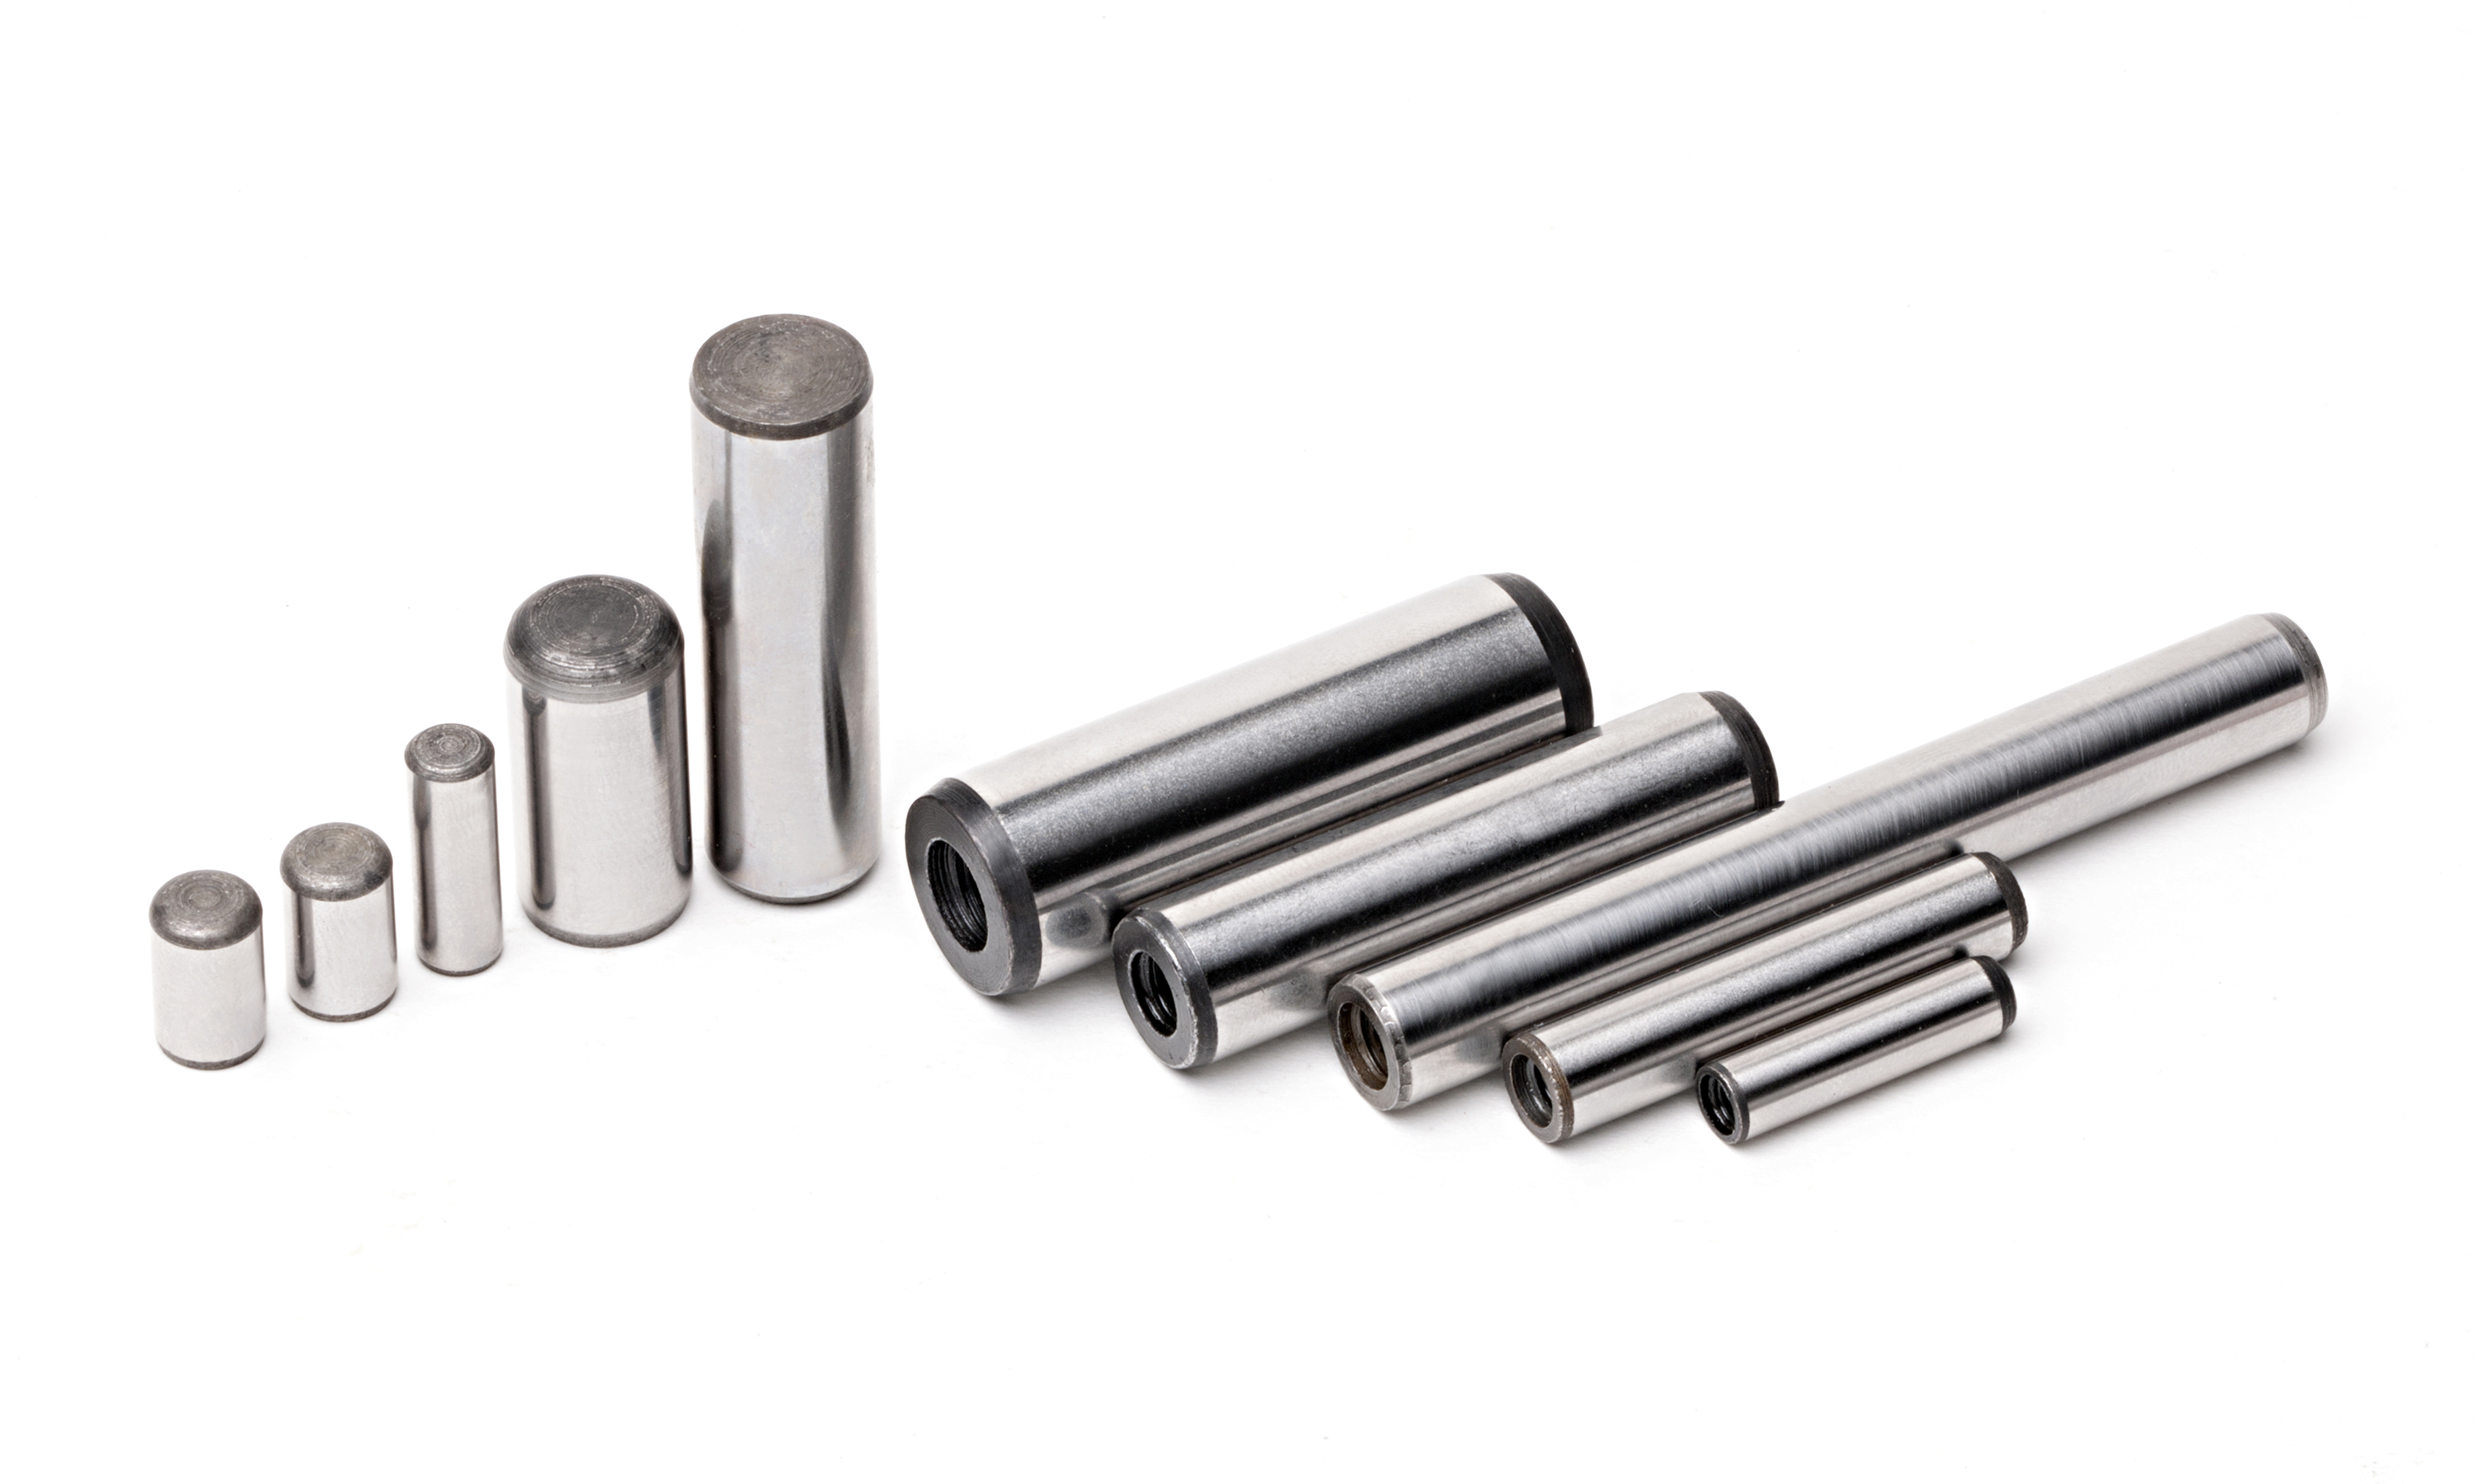 1/4" x 7/8" Dowel Pin Hardened And Ground Alloy Steel Bright Finish 